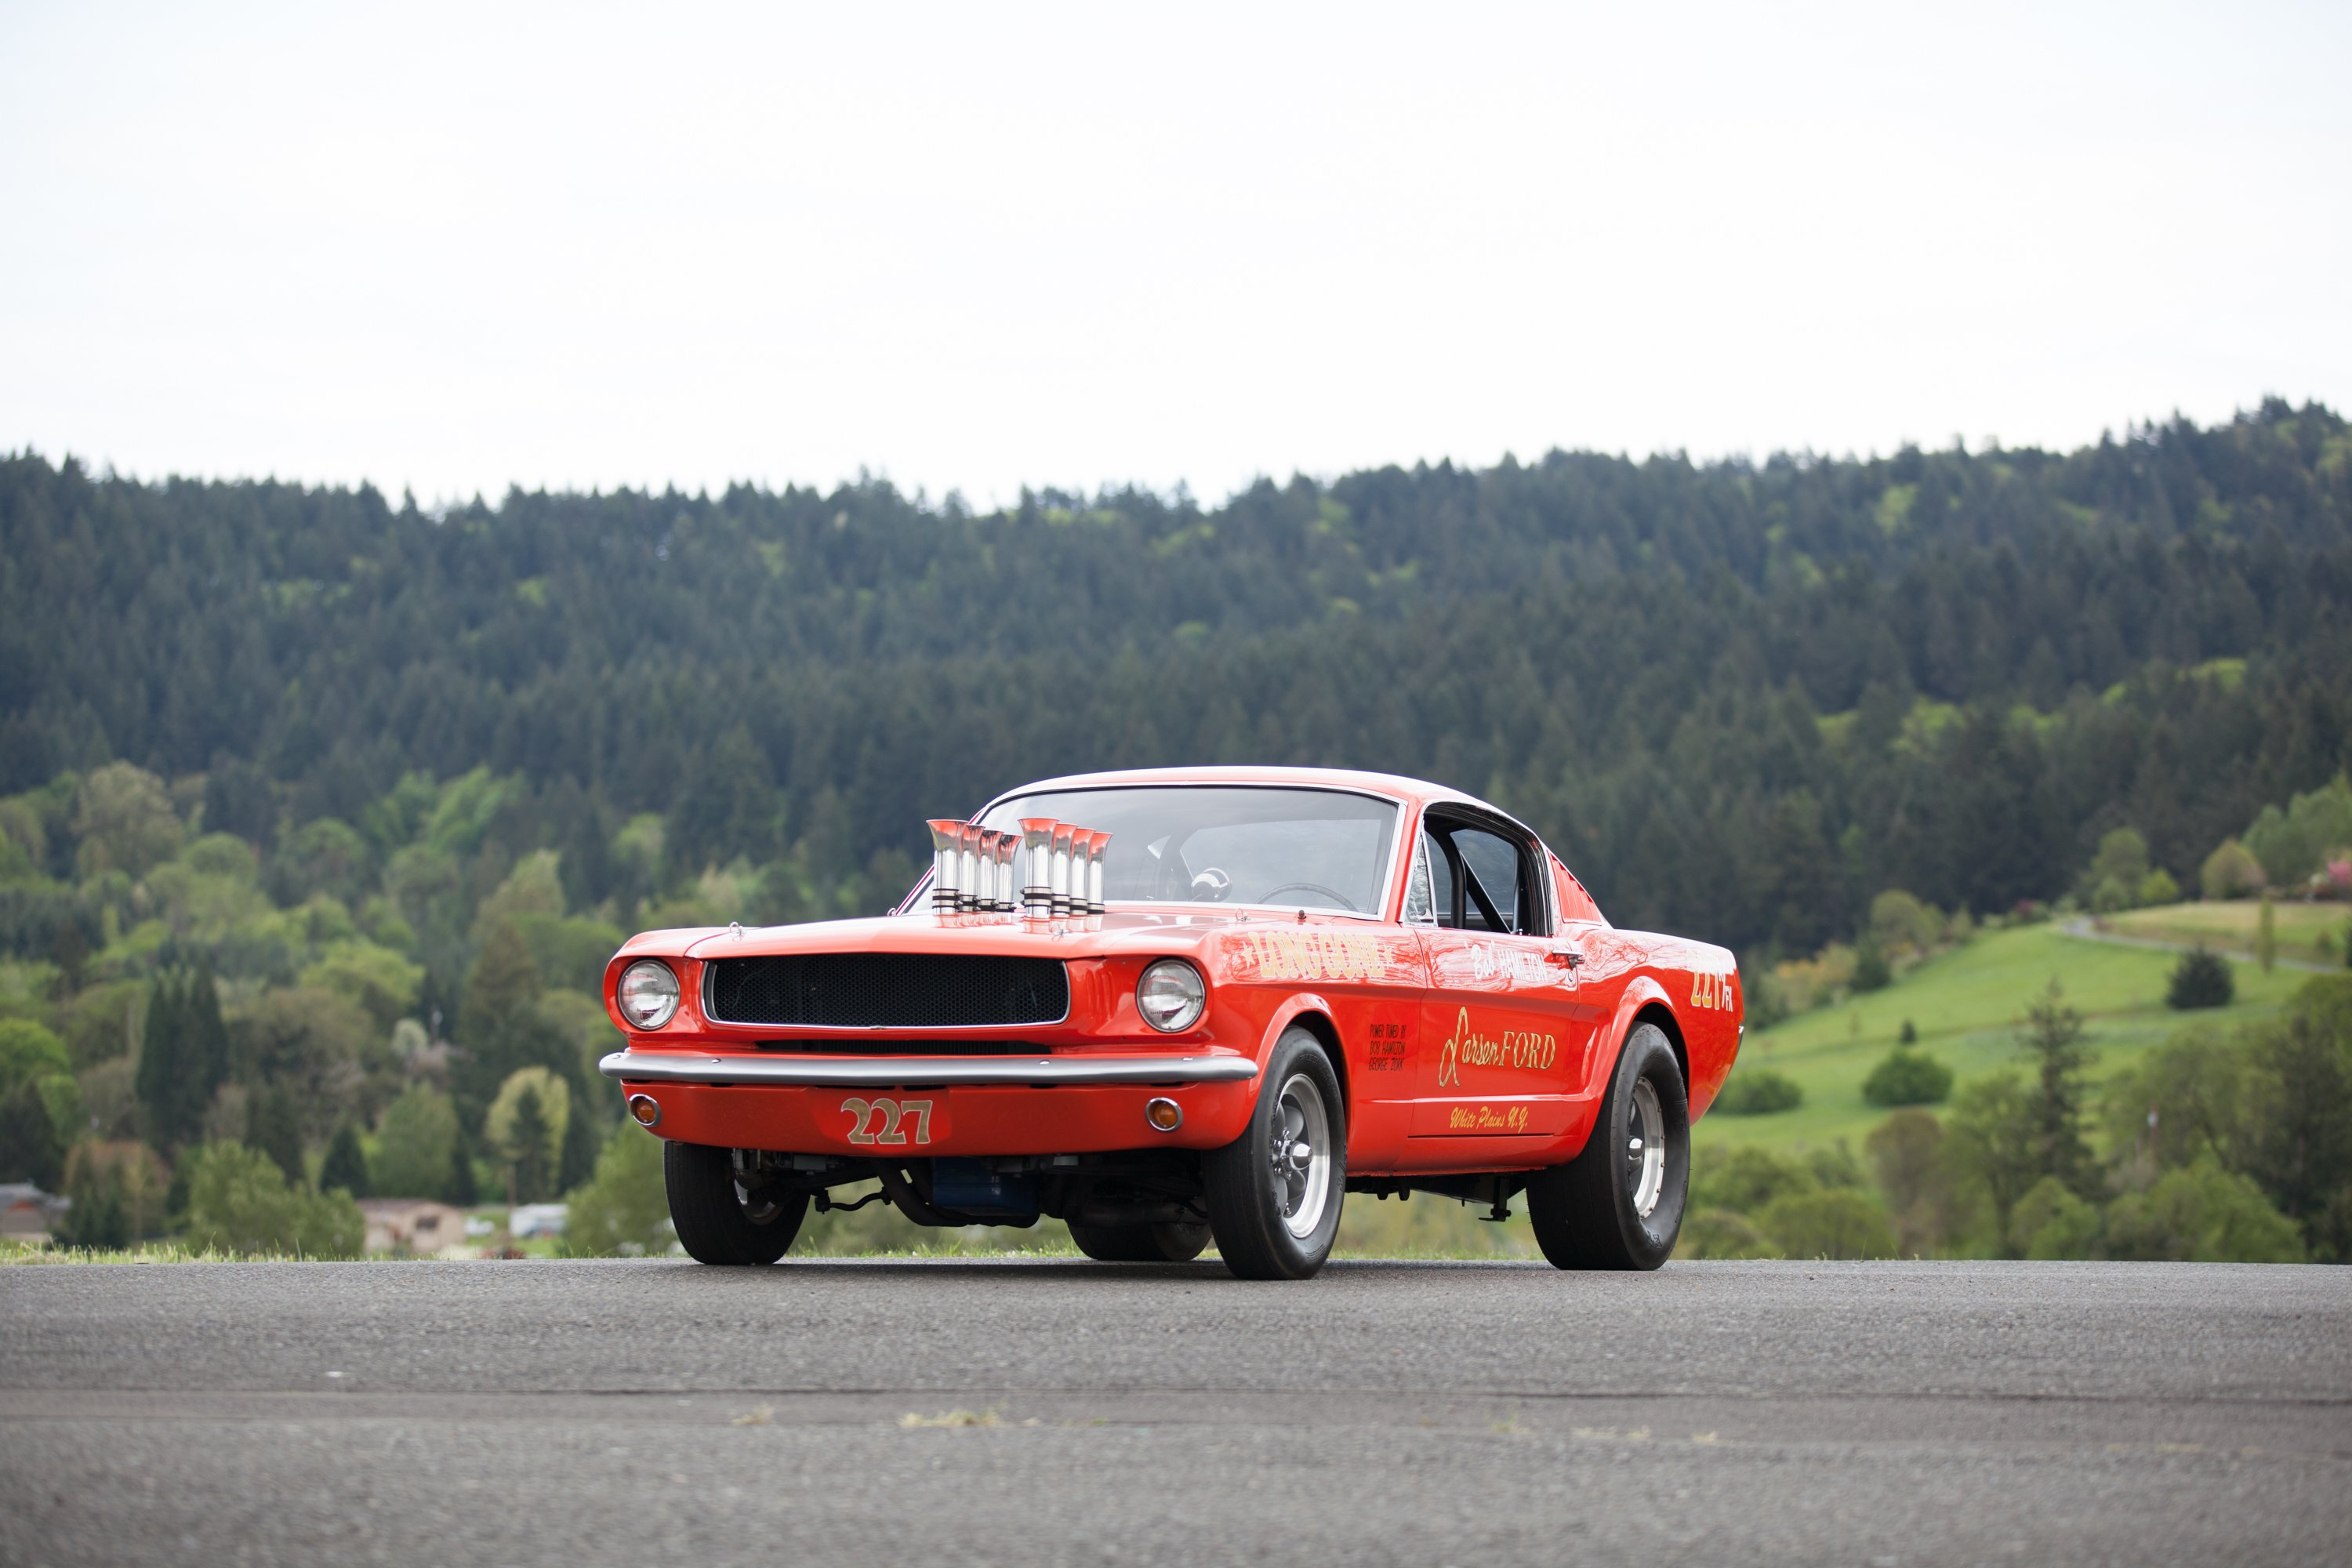 1965, Ford, Mustang, A fx, Holman, Moody, Prostock, Drag, Dragster, Race, Car, Usa,  08 Wallpaper